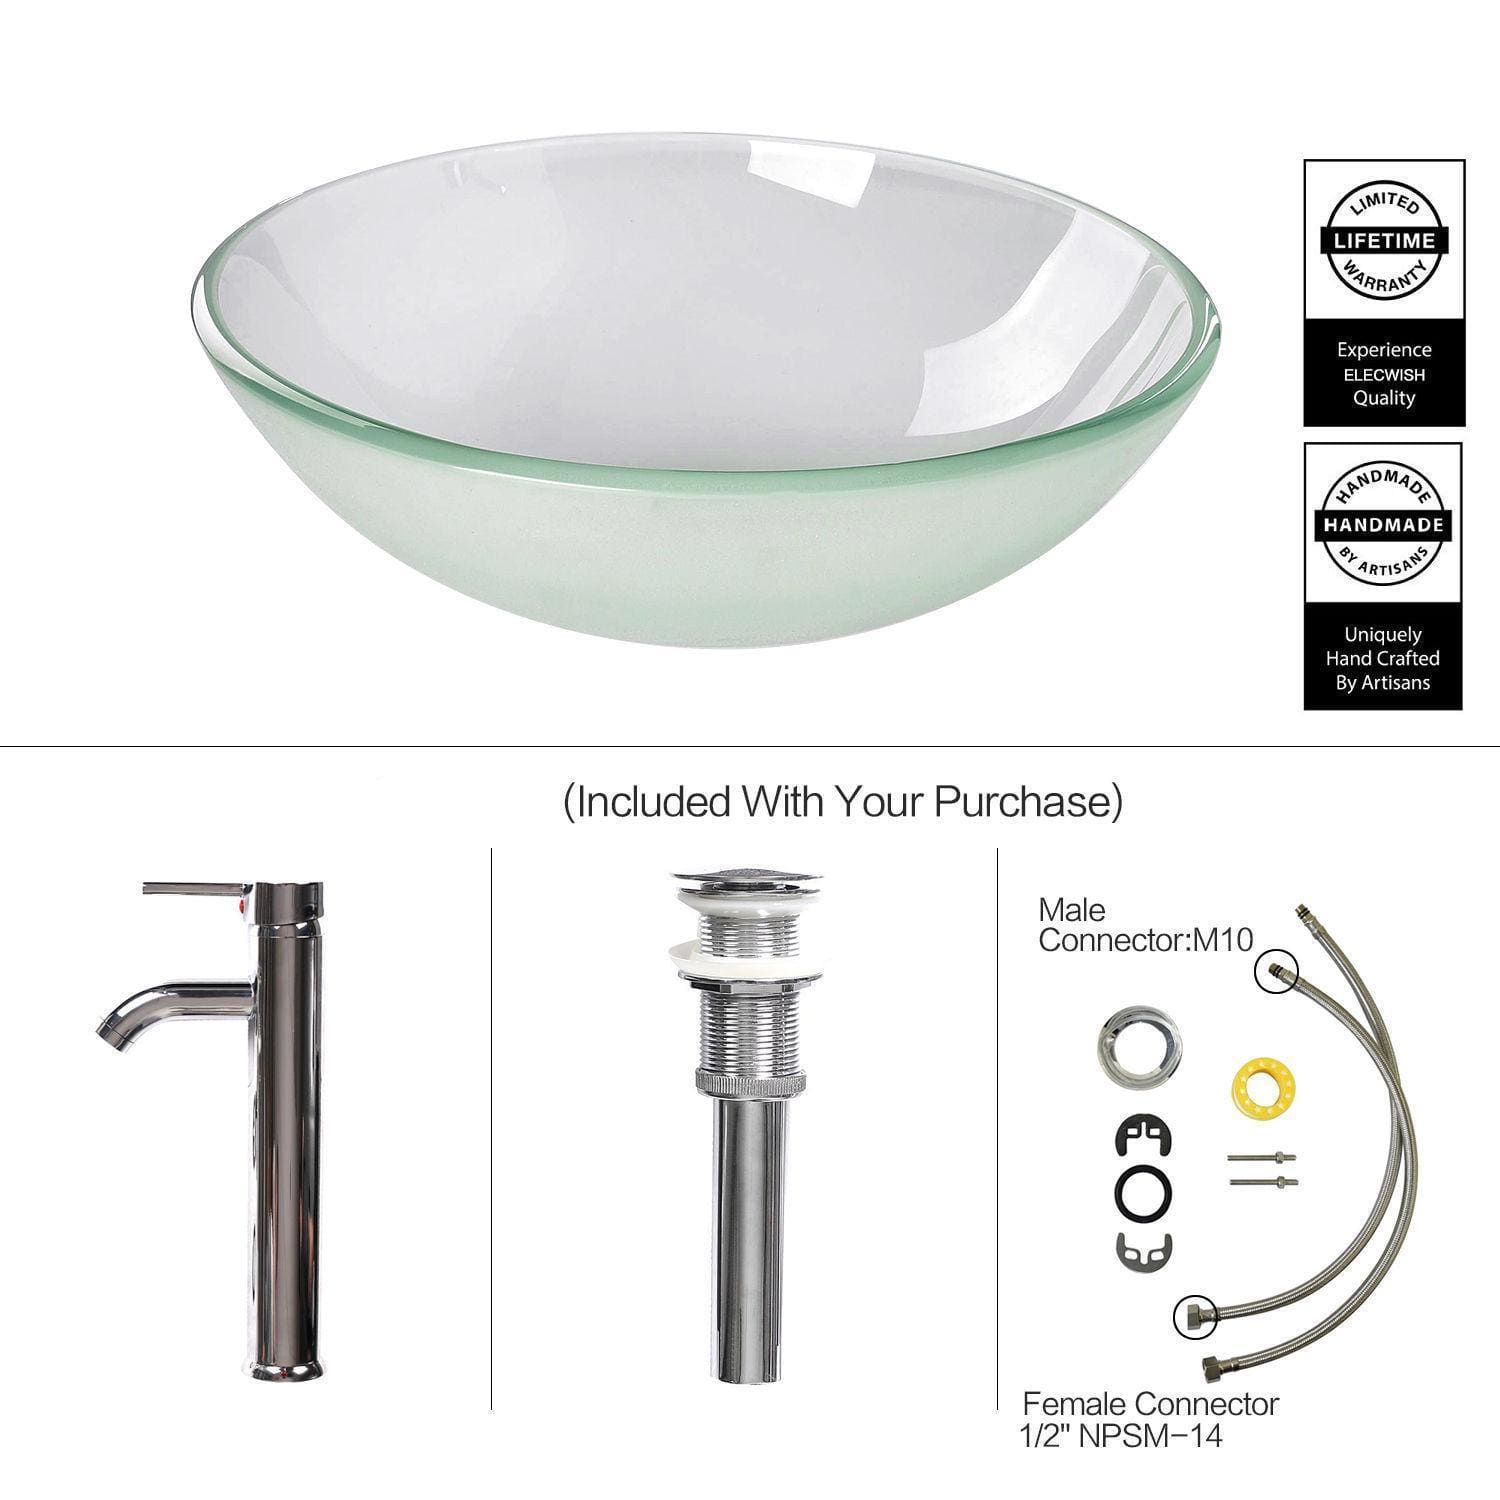 Elecwish Glass Vessel Bathroom Sink parts included with your purchase